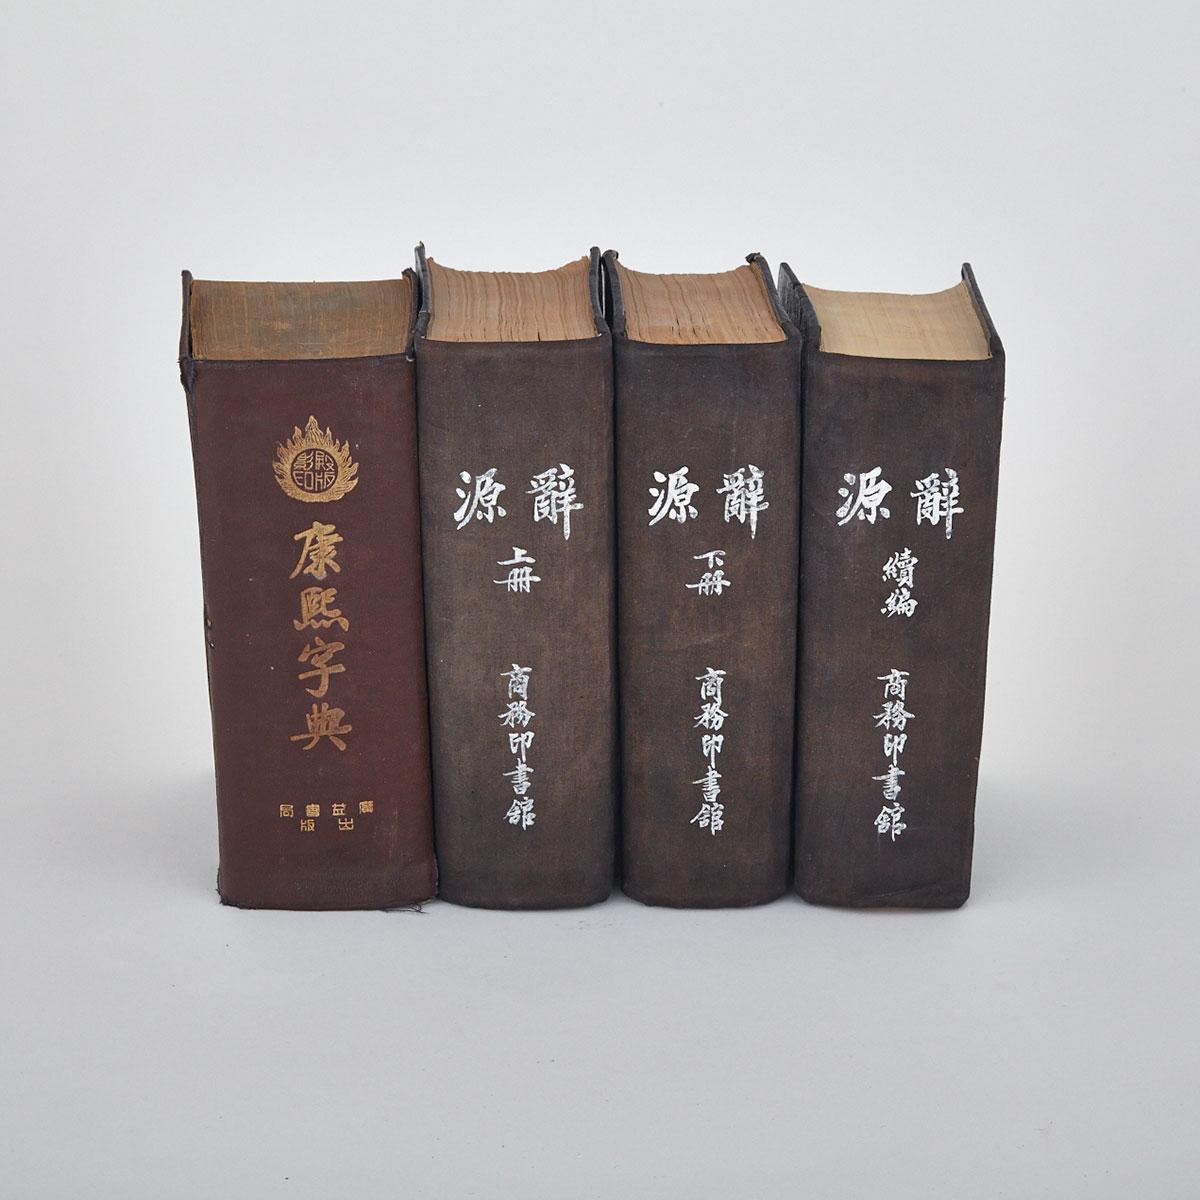 Four Old Chinese books